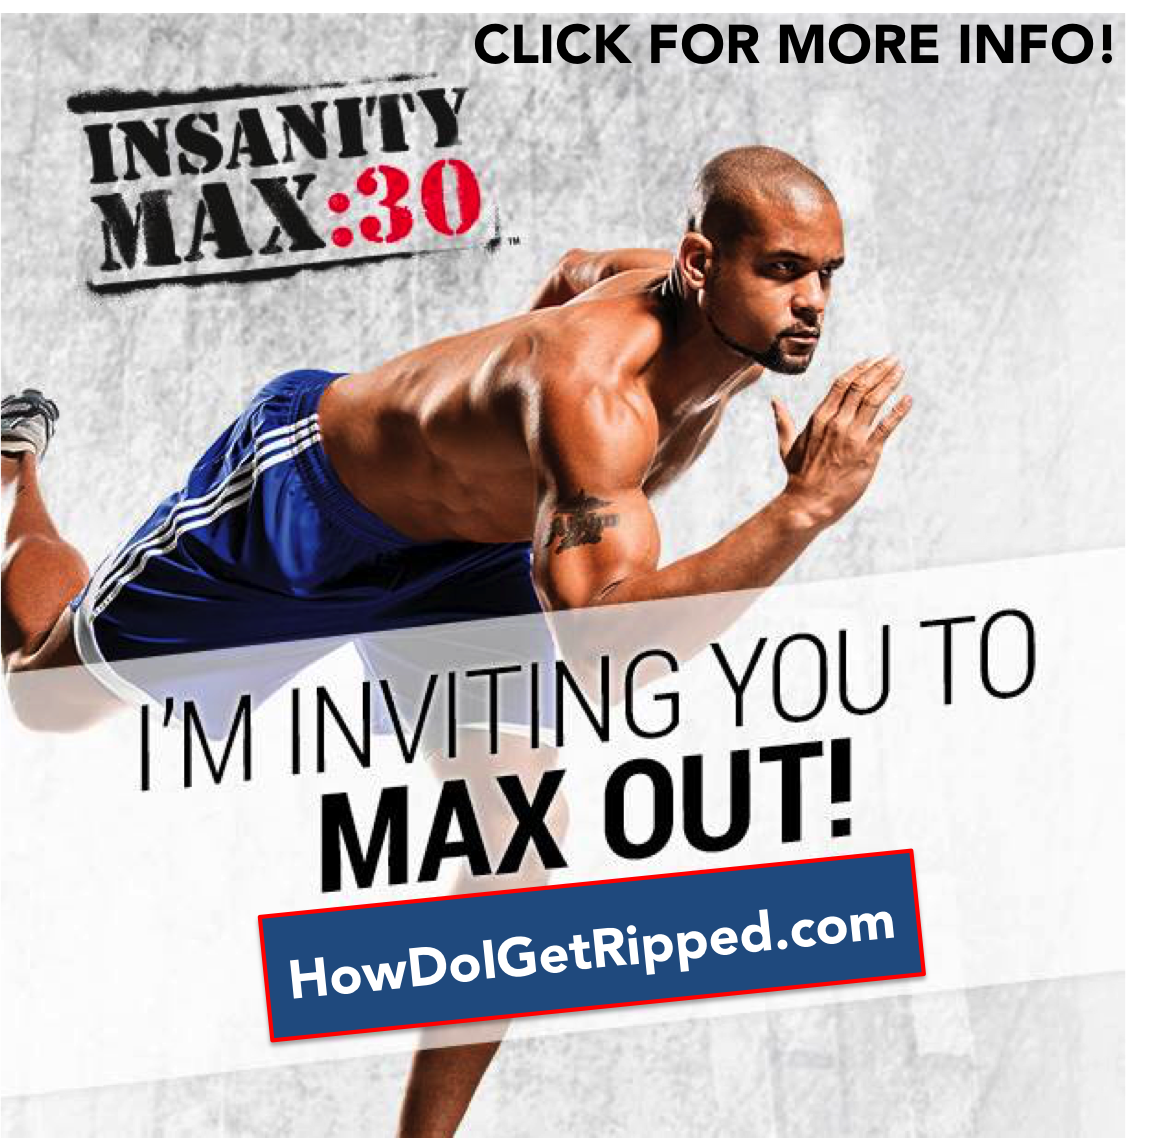 Does Insanity Max:30 Work? Workout Reviews (Complete List)